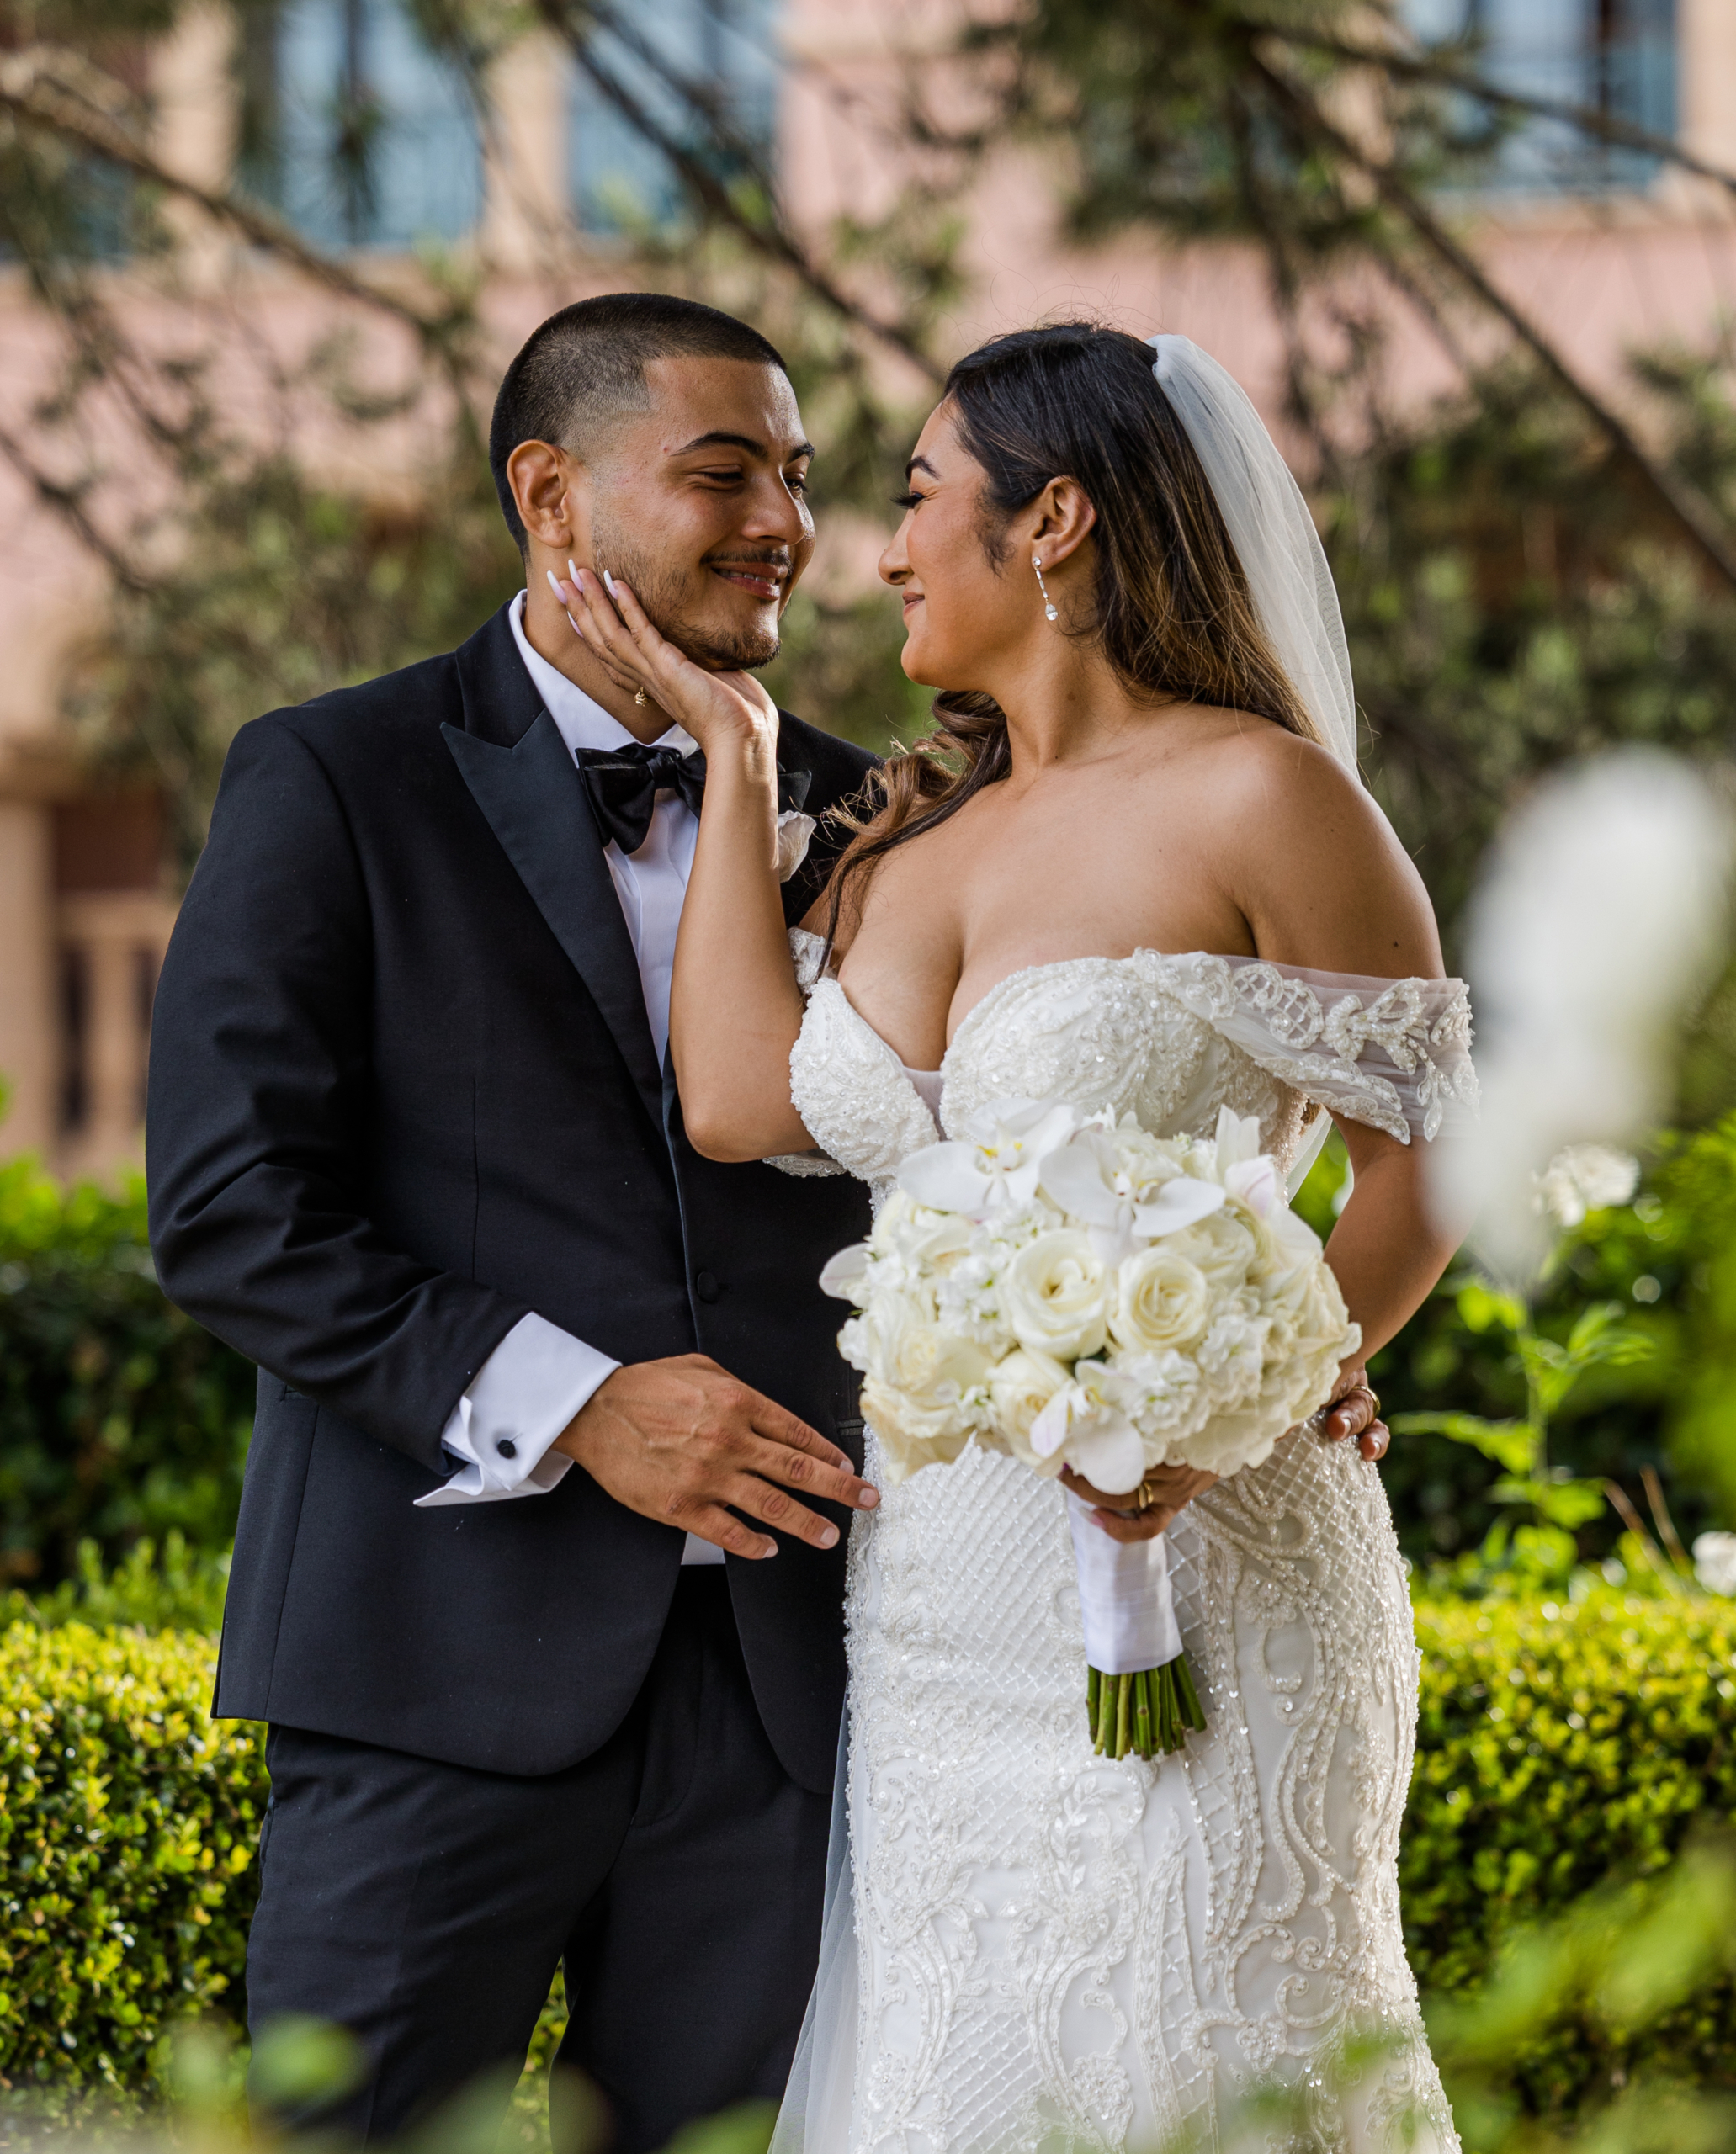 Bride and groom on their wedding day at Fairmont Grand Del Mar captured by Carlsbad Photo Best Carlsbad Wedding Photographer